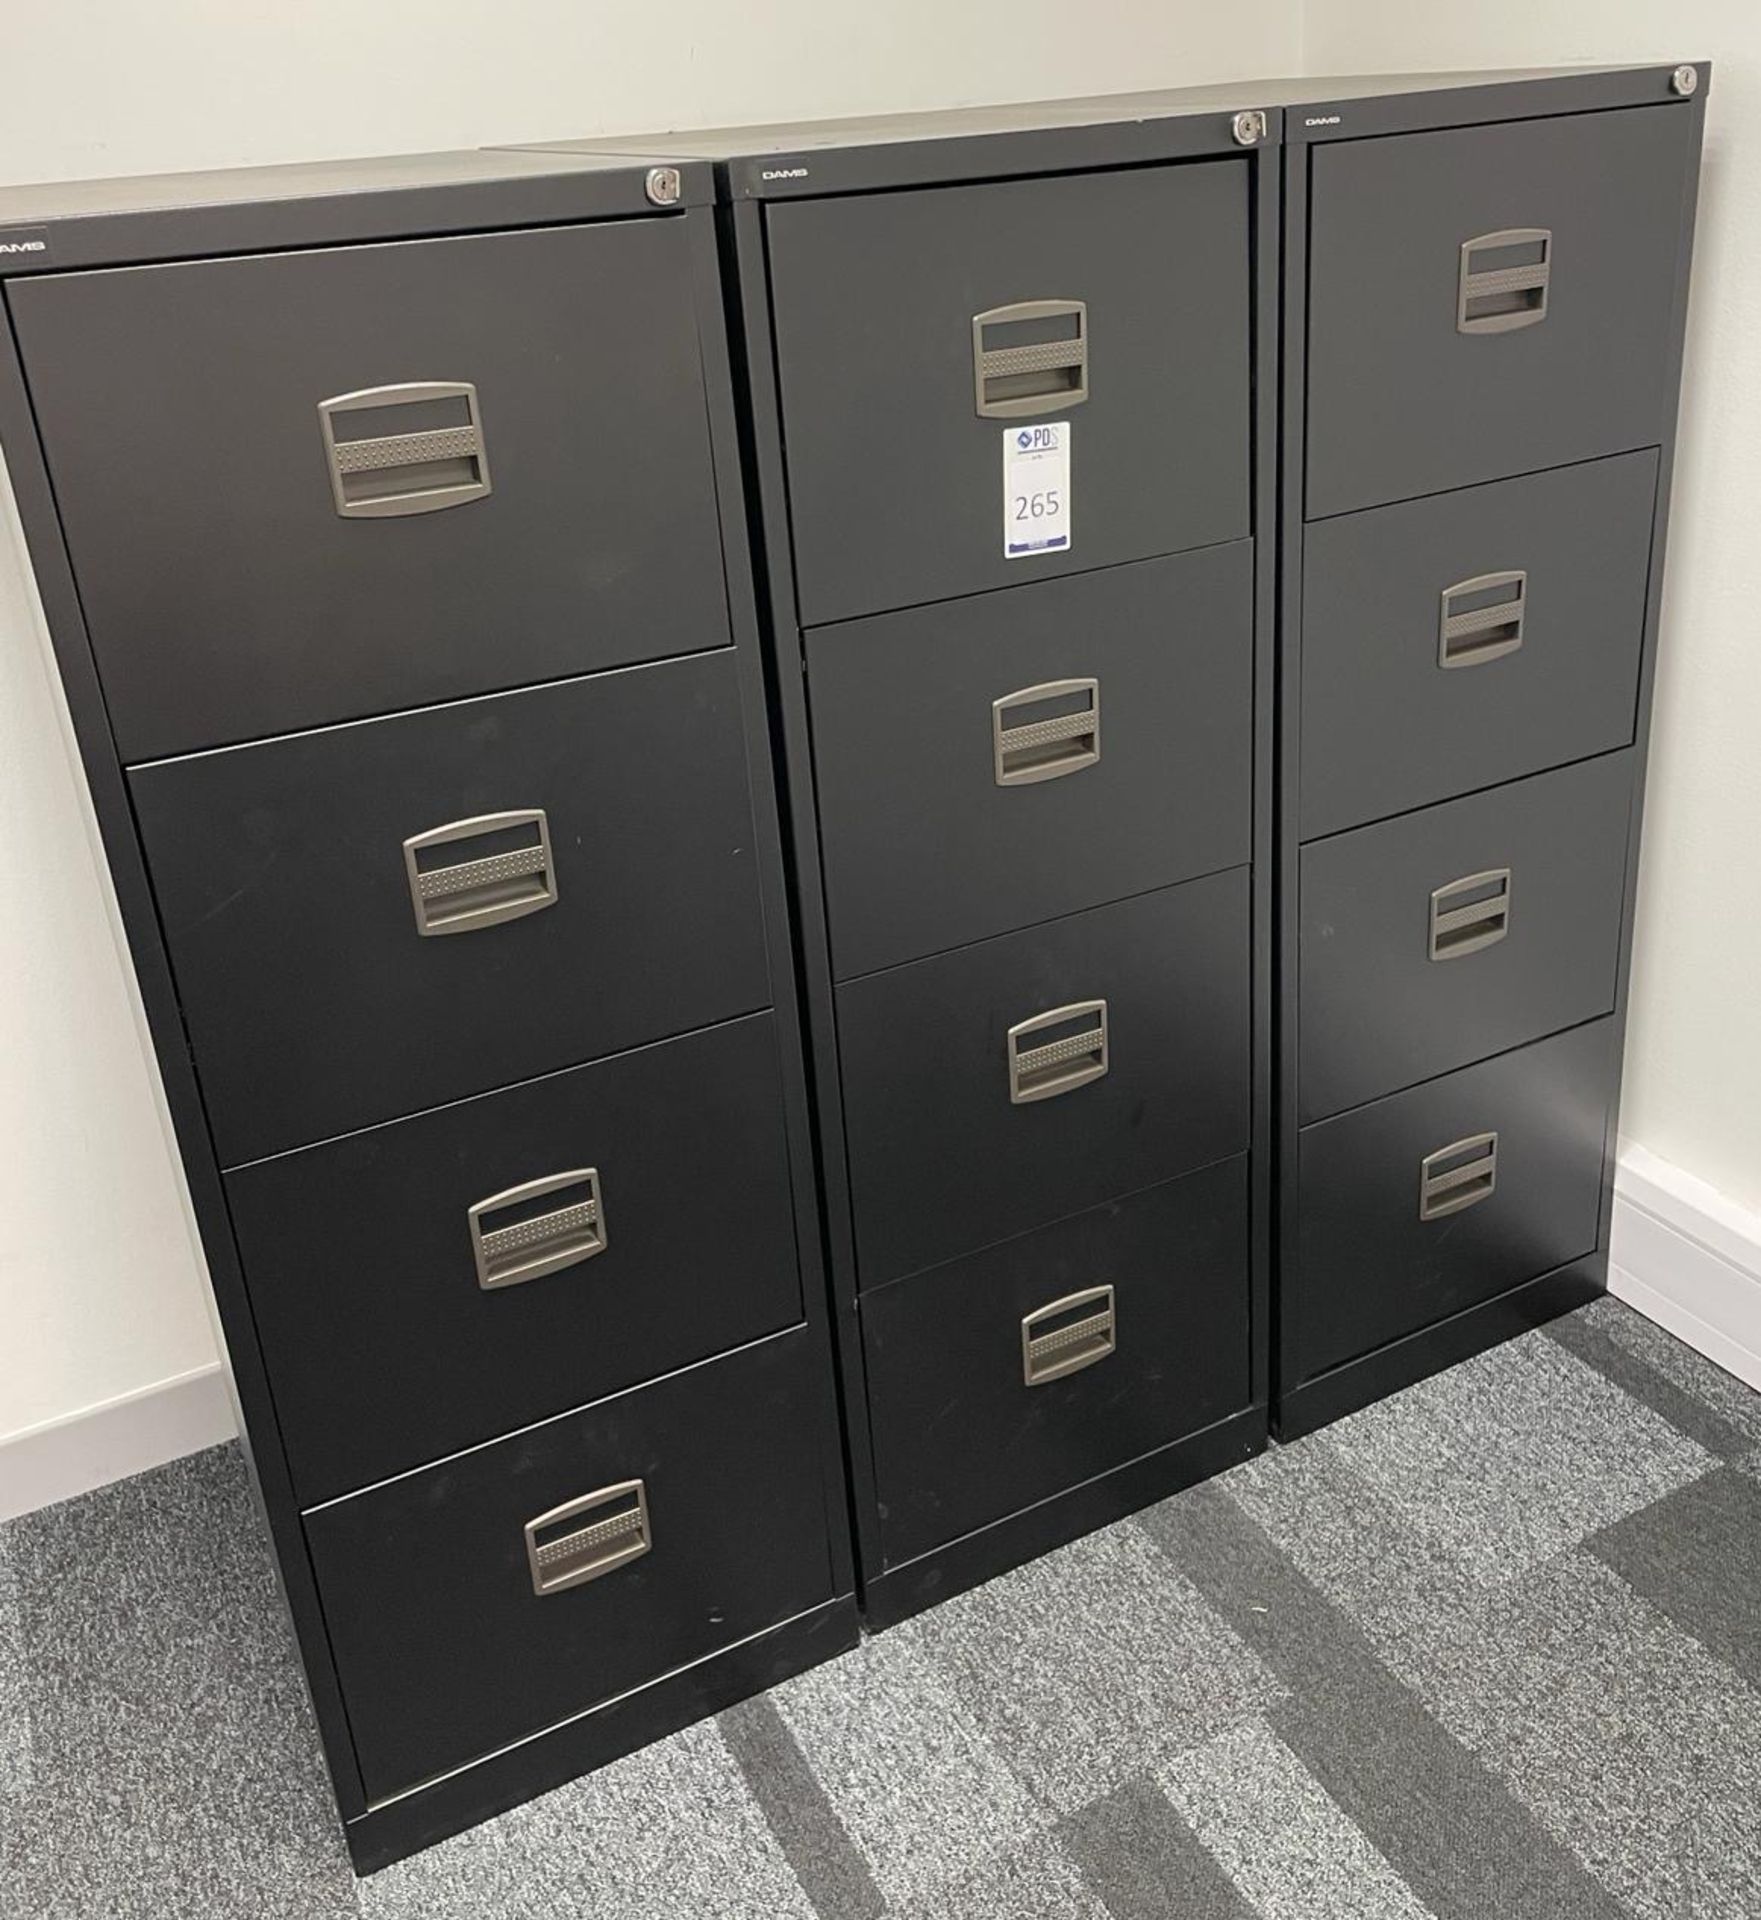 3 Metal Filing Cabinets, 4-Drawer (Located Rugby. Please Refer to General Notes)